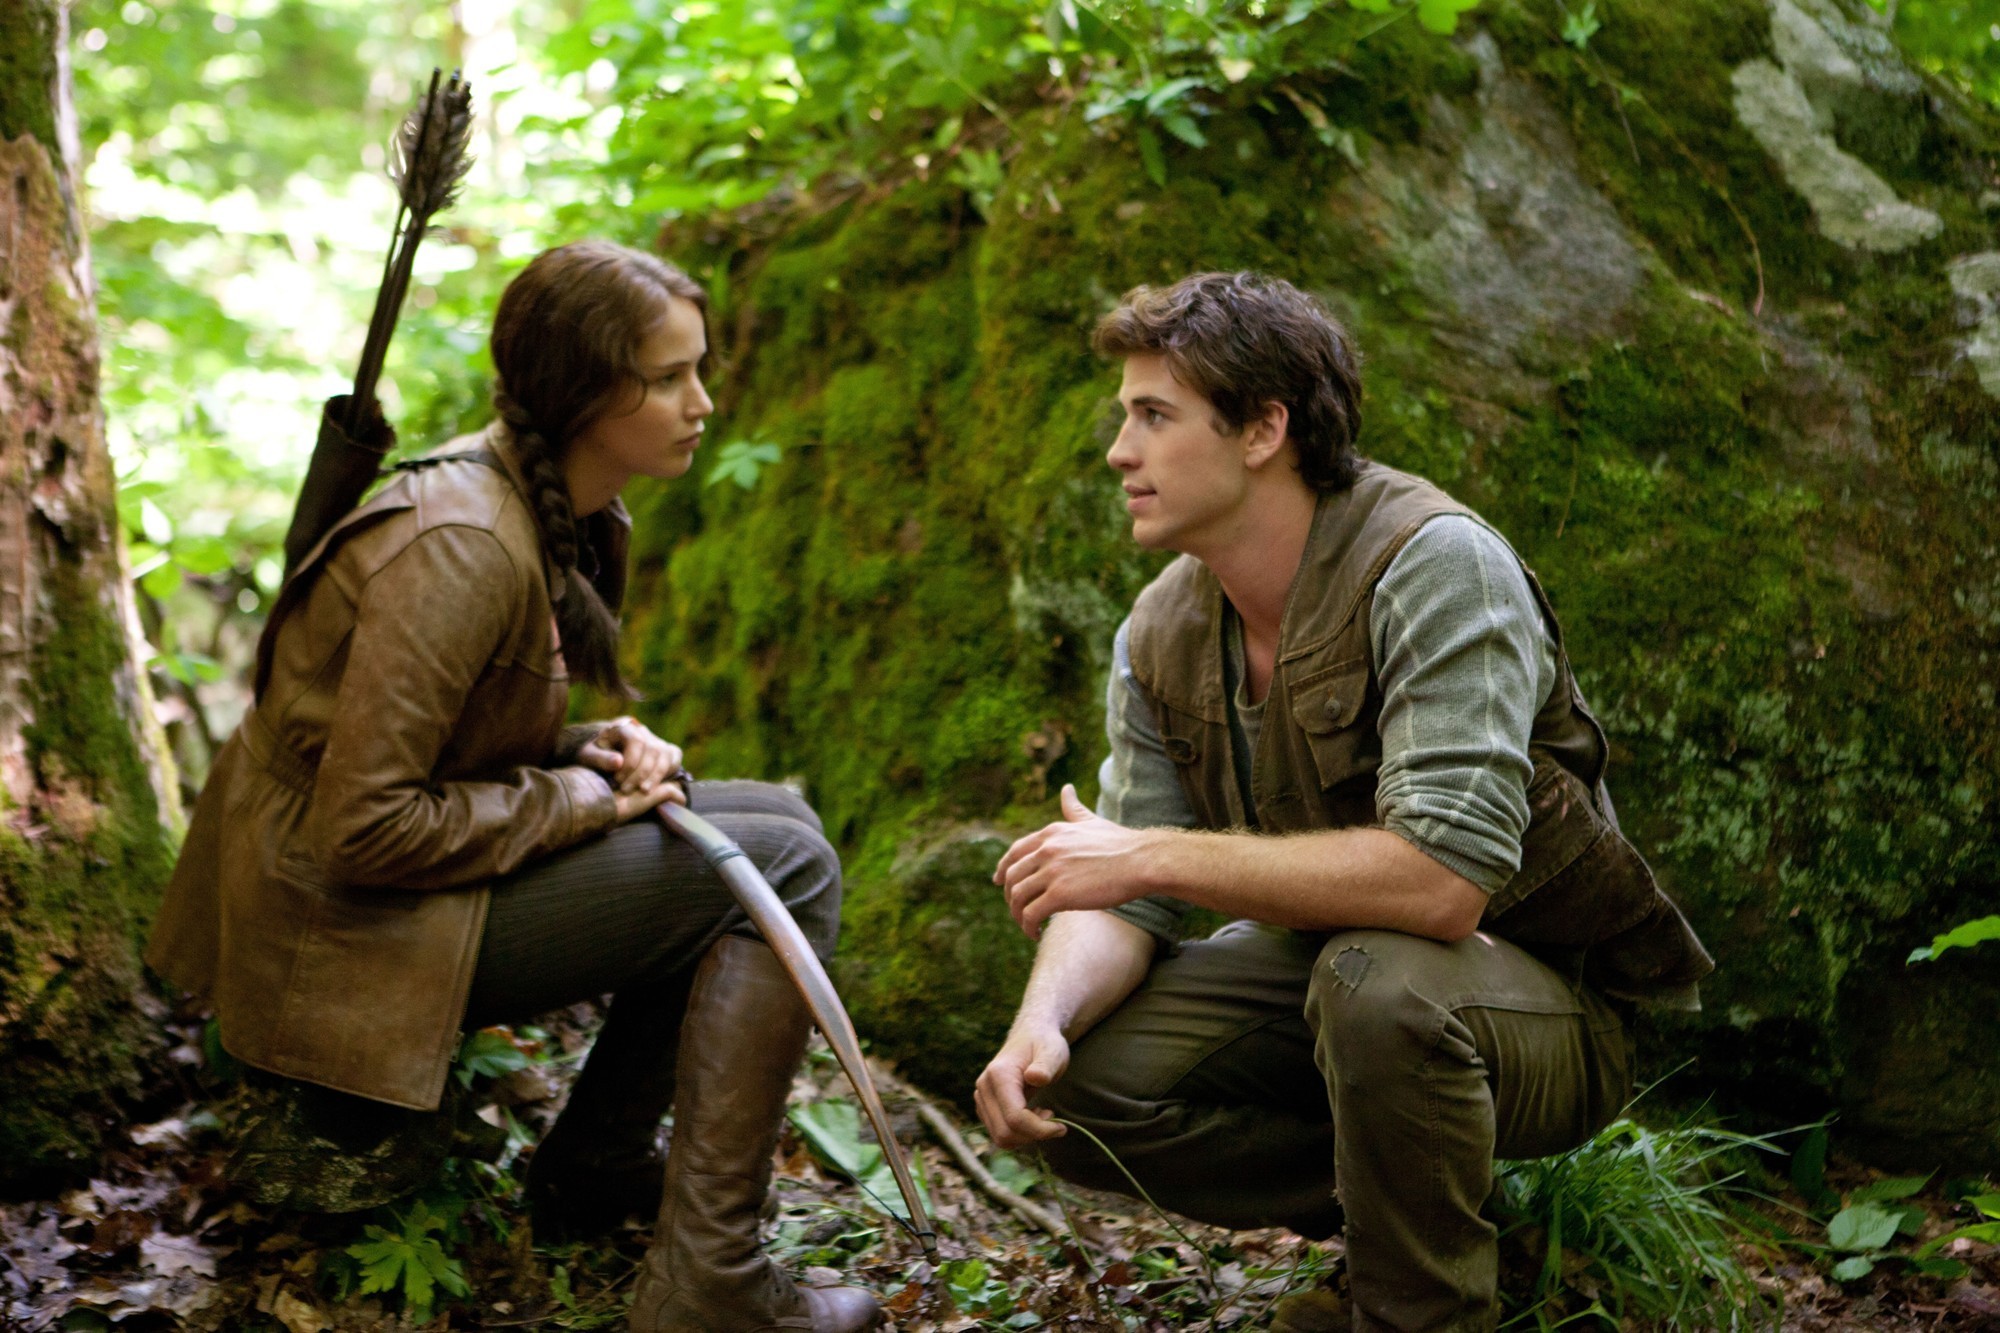 Jennifer Lawrence stars as Katniss Everdeen and Liam Hemsworth stars as Gale Hawthorne in Lionsgate Films' The Hunger Games (2012)